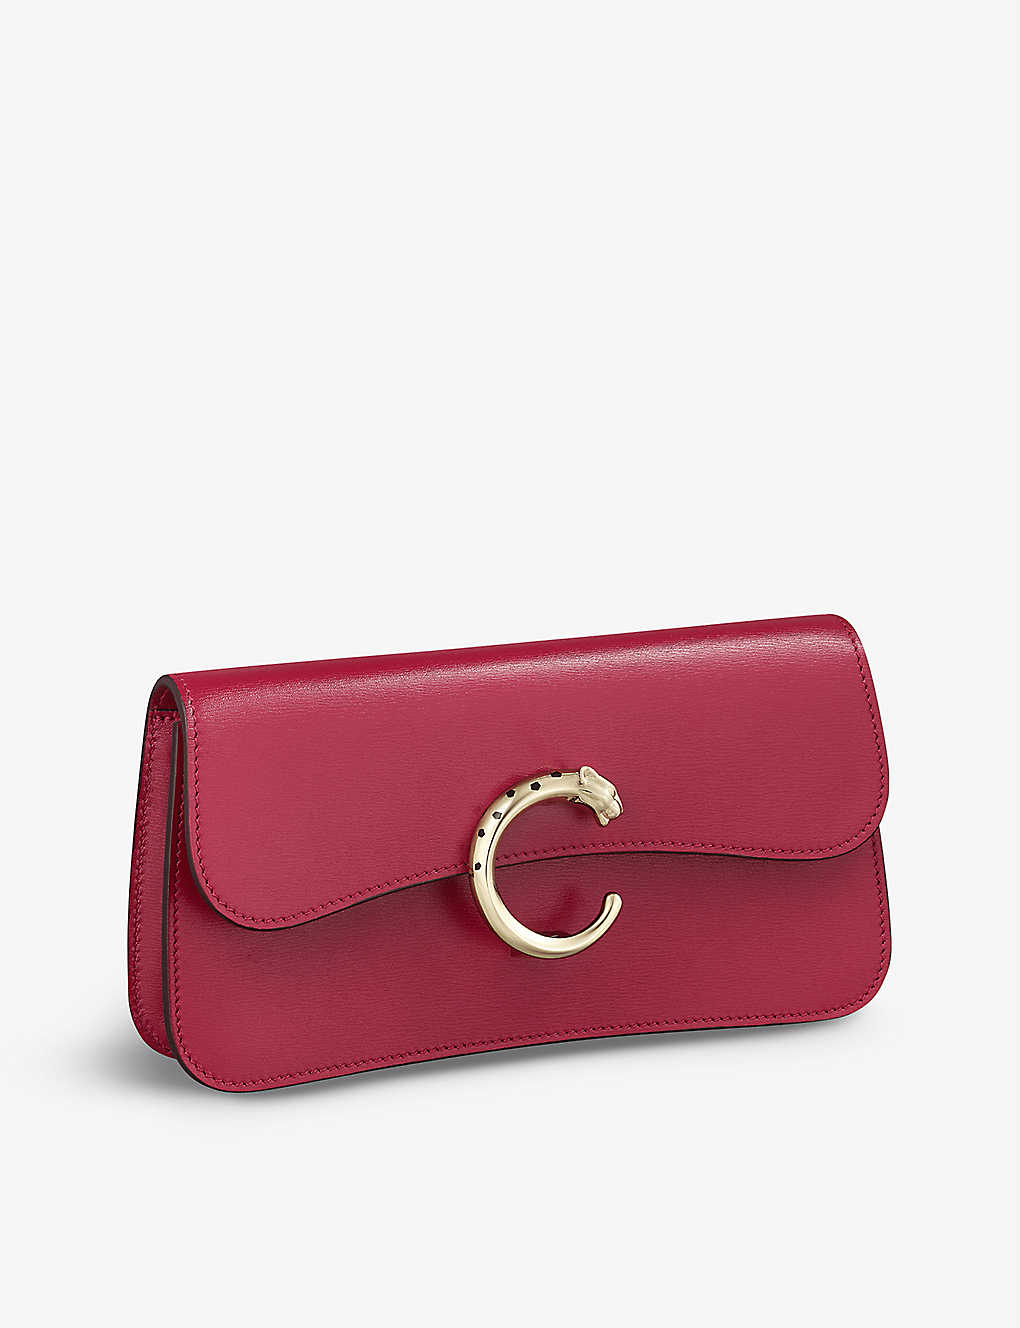 Cartier Panthère De  Chain Leather Mini Cross-body Bag In Red